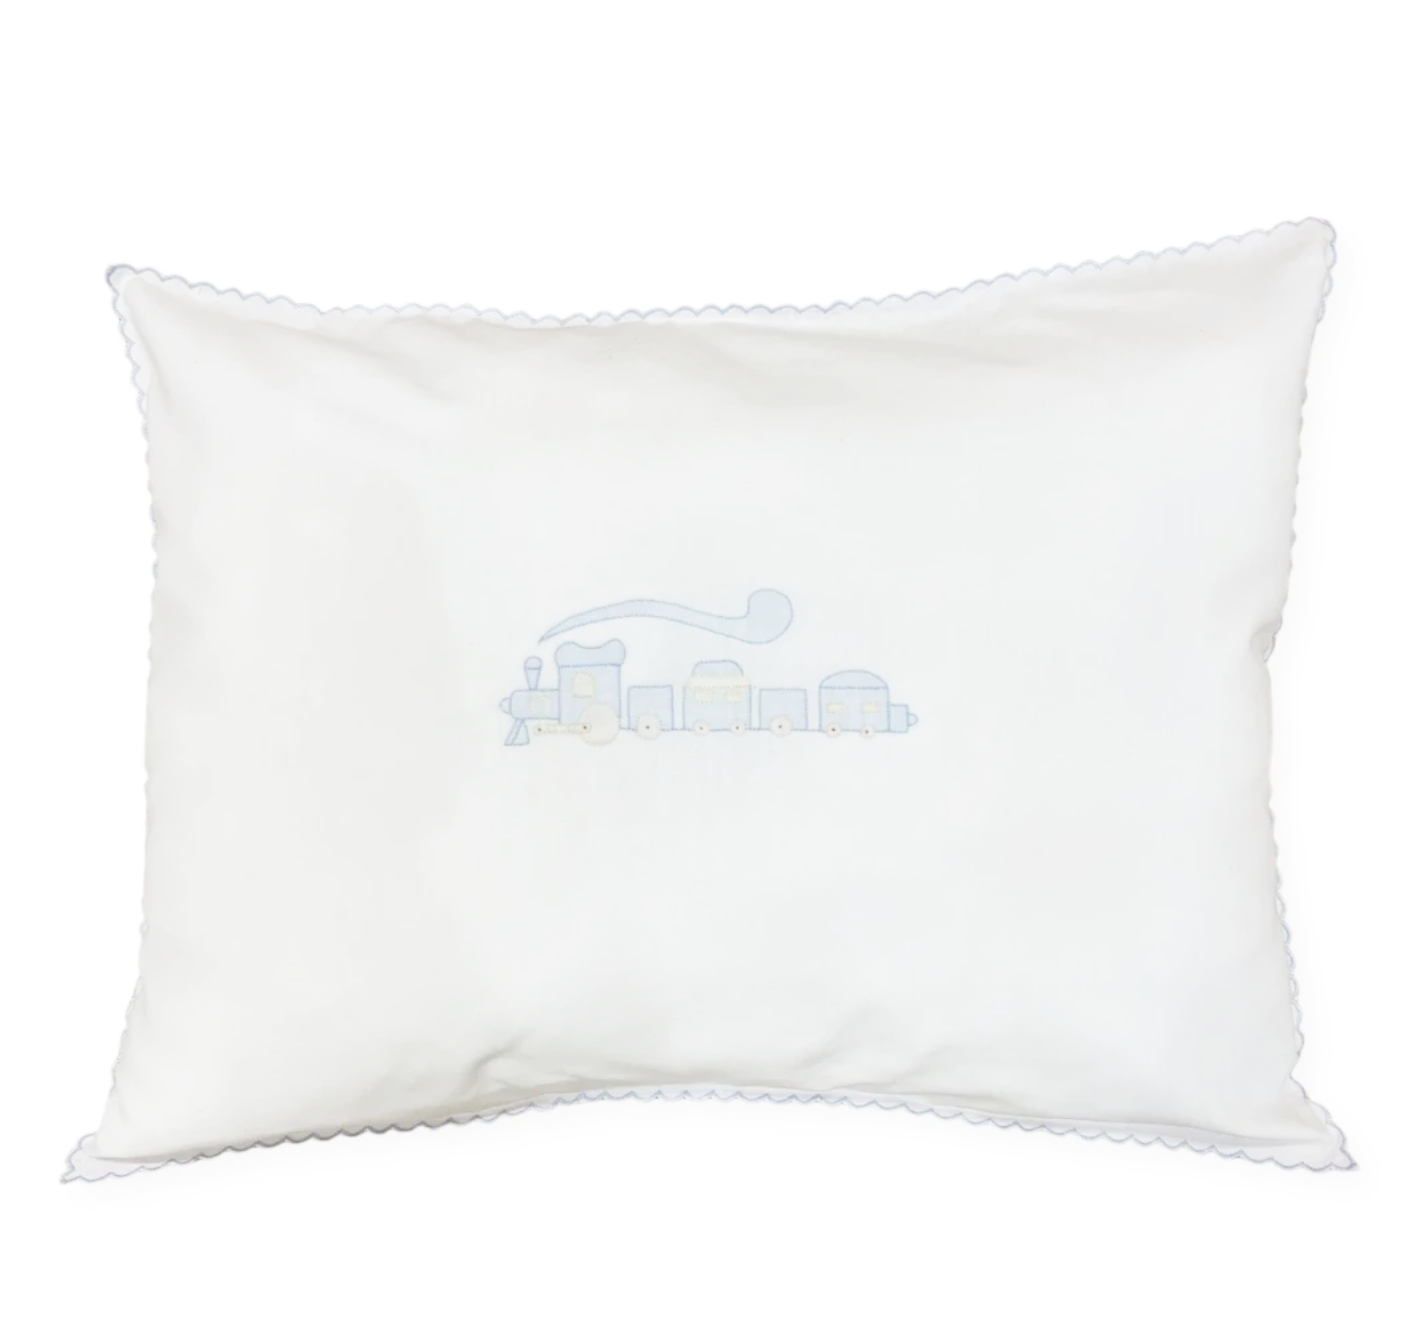 Baby Pillow with Embroidered Train